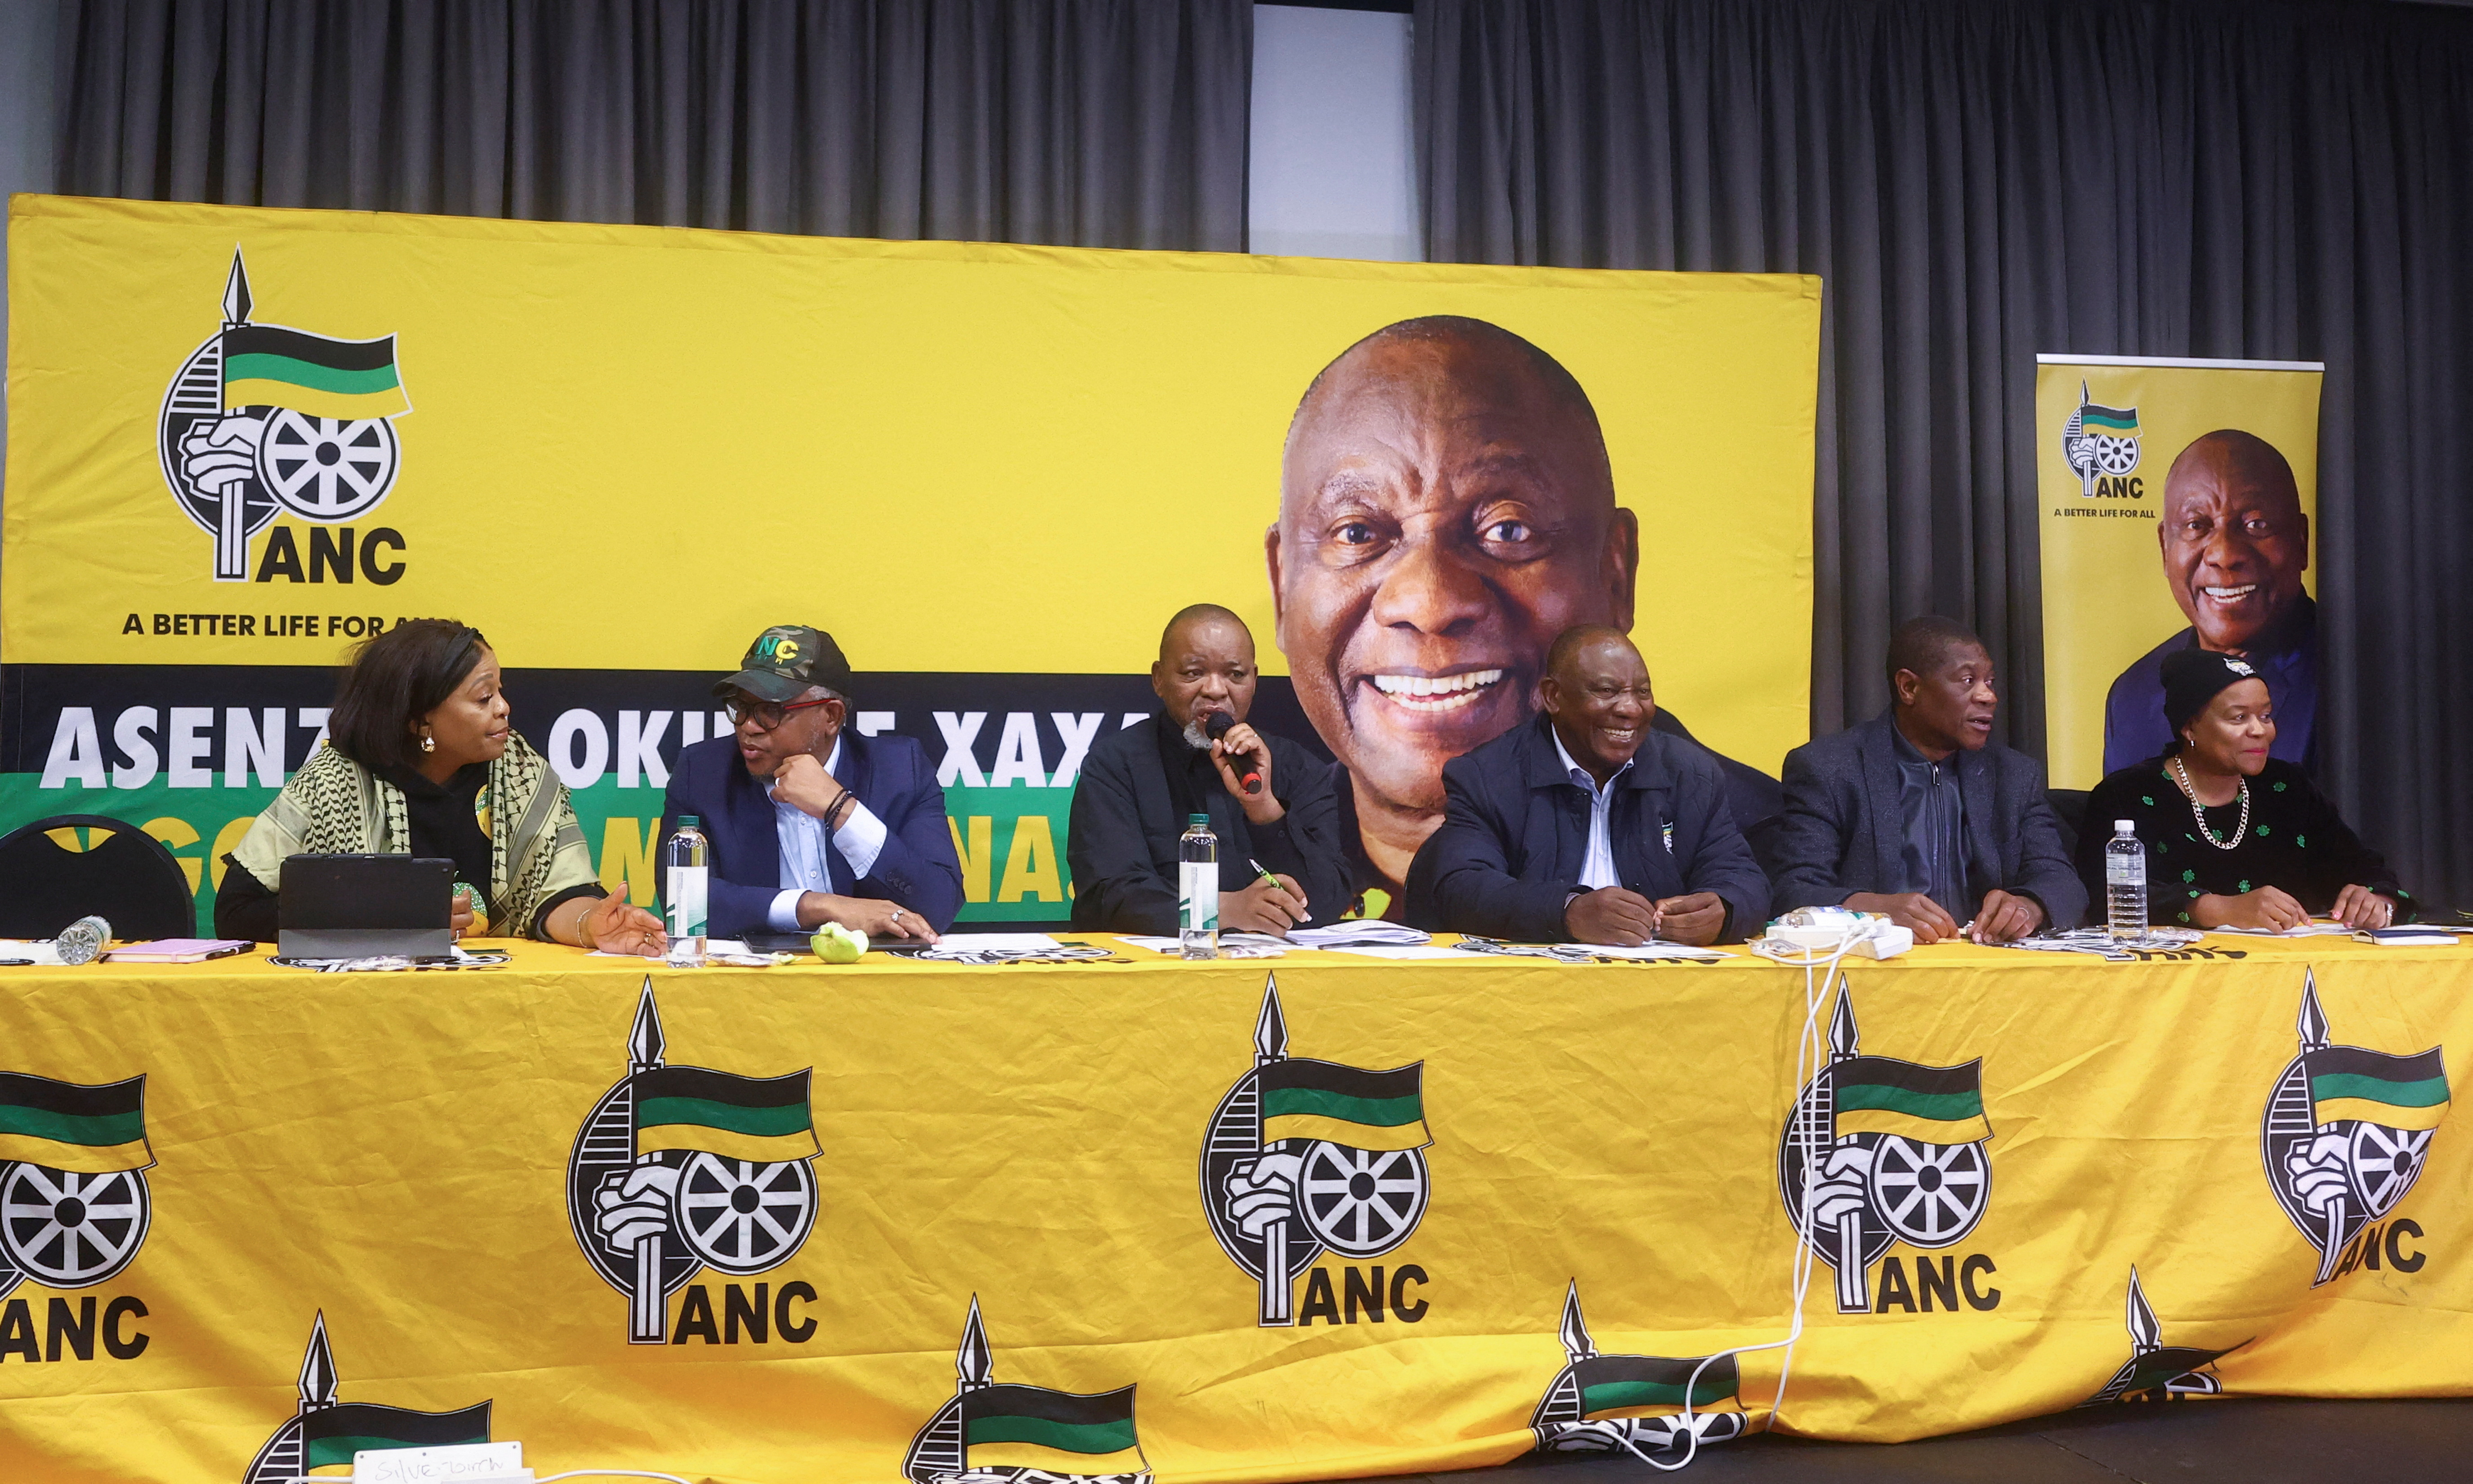 South Africa's ANC says it is looking at all options to form government